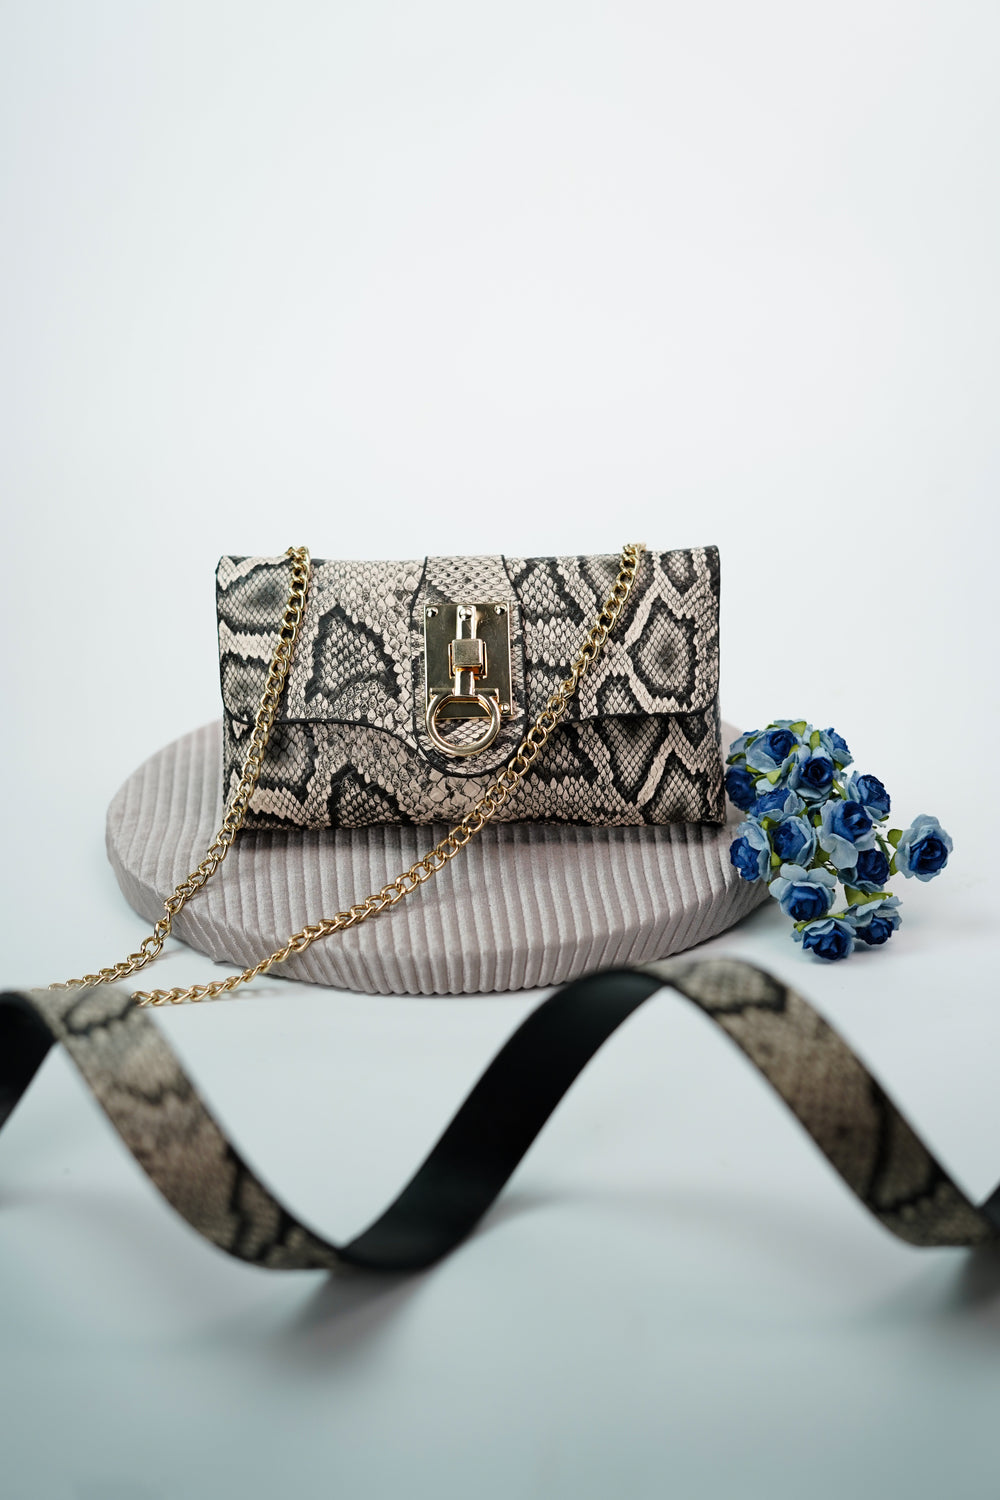 Edgy Python Print Belt Bag Accessory with a Touch of Exotic Flair